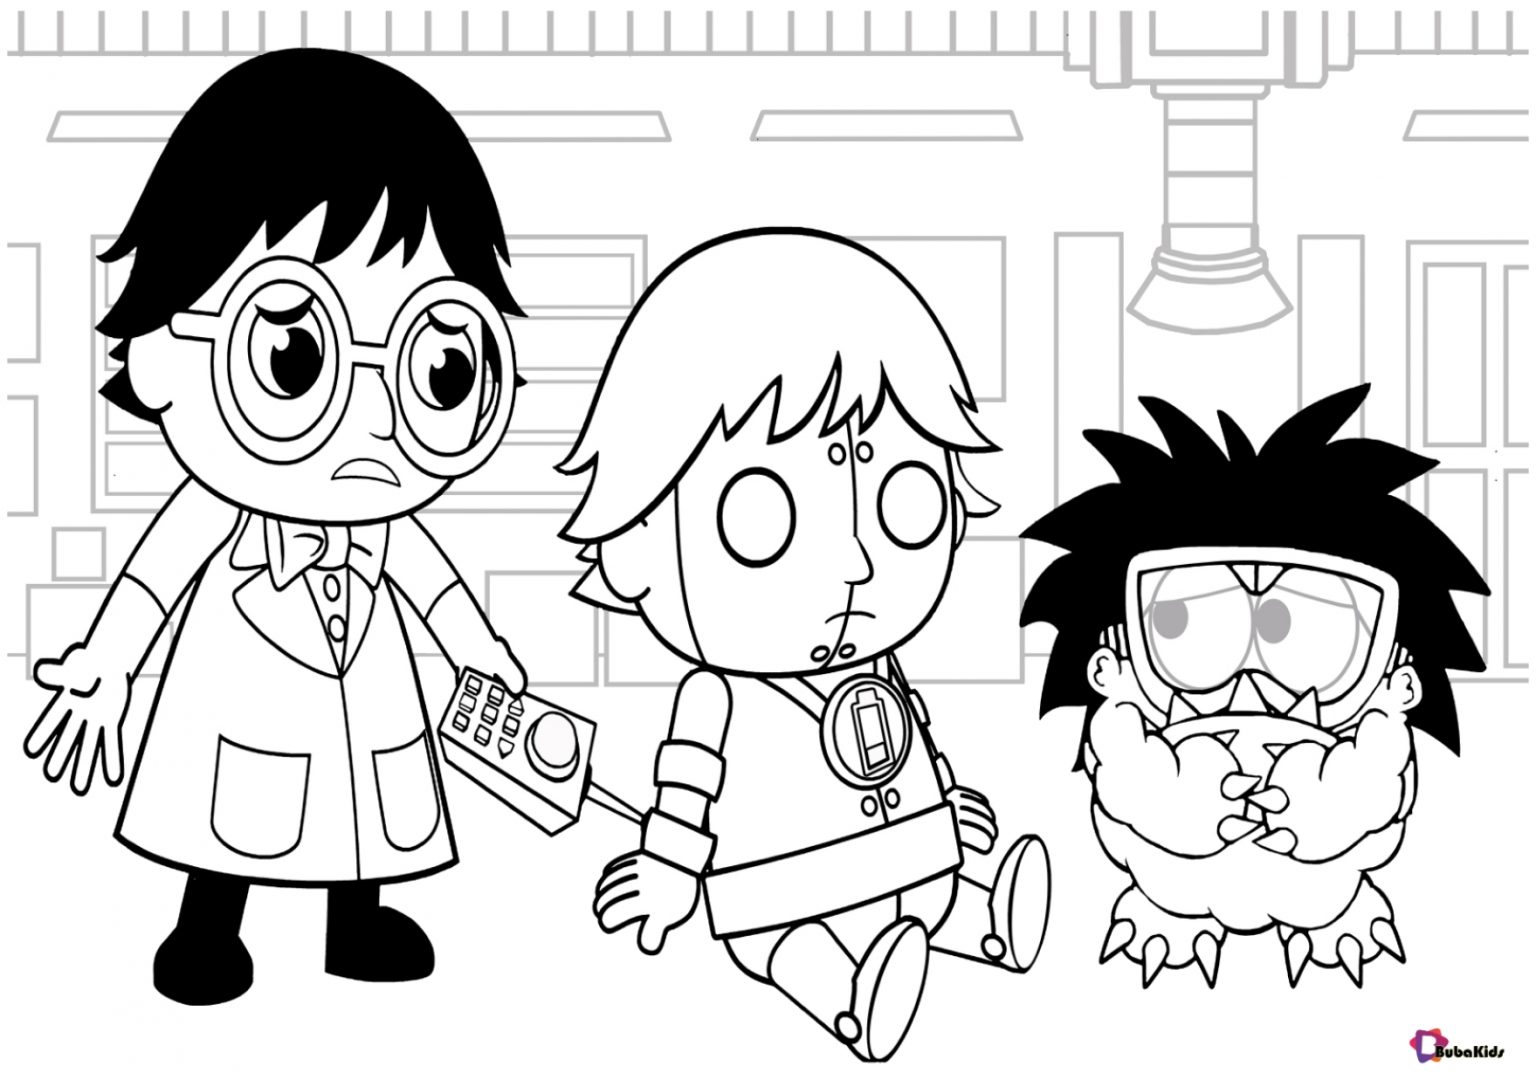 Ryan’s world cartoon coloring pages   BubaKids.com